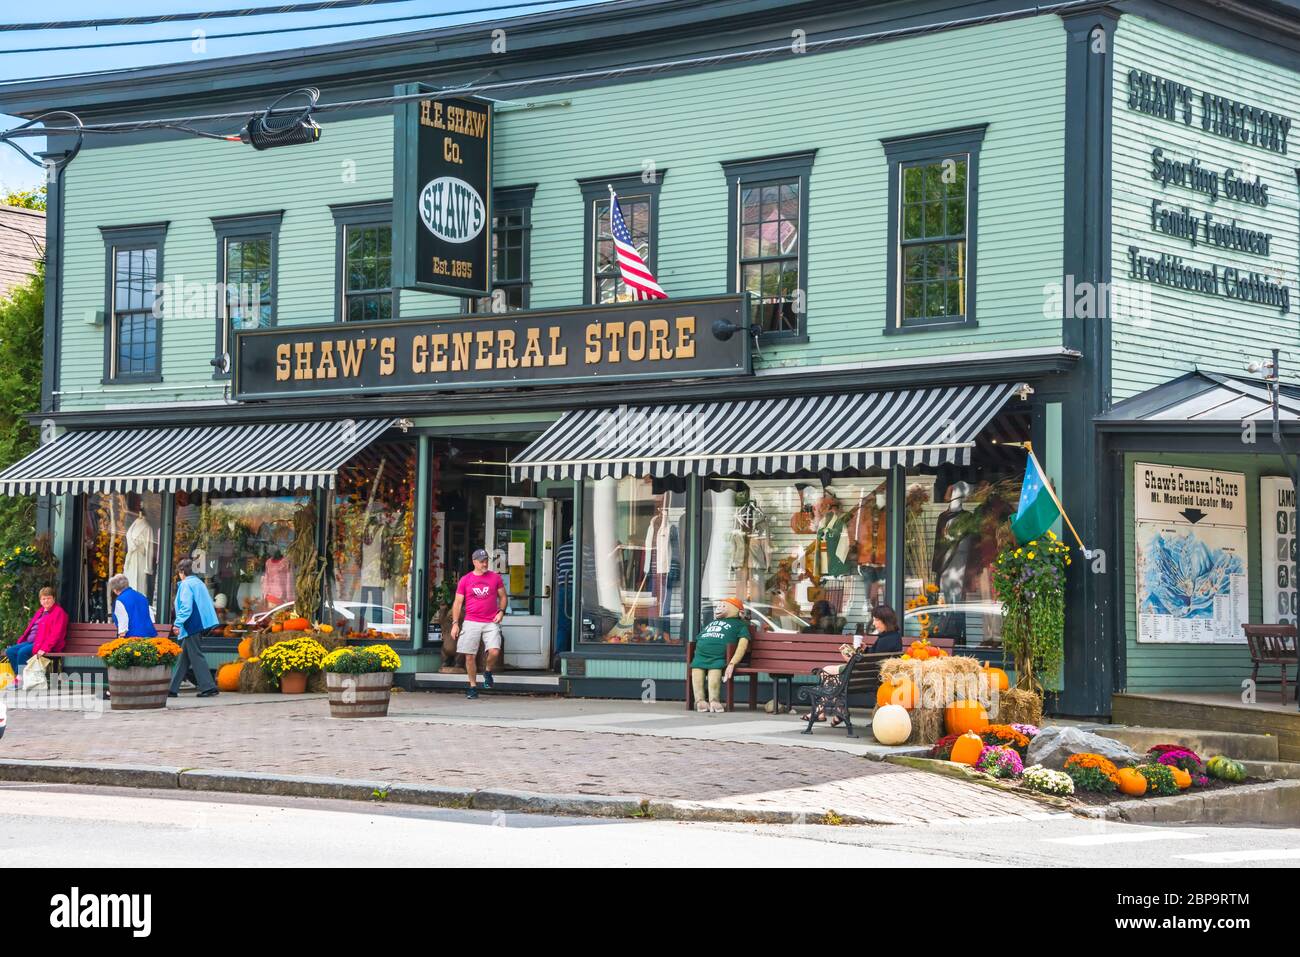 Shaw's General Store Storefront, Stowe, Vermont Stock Photo